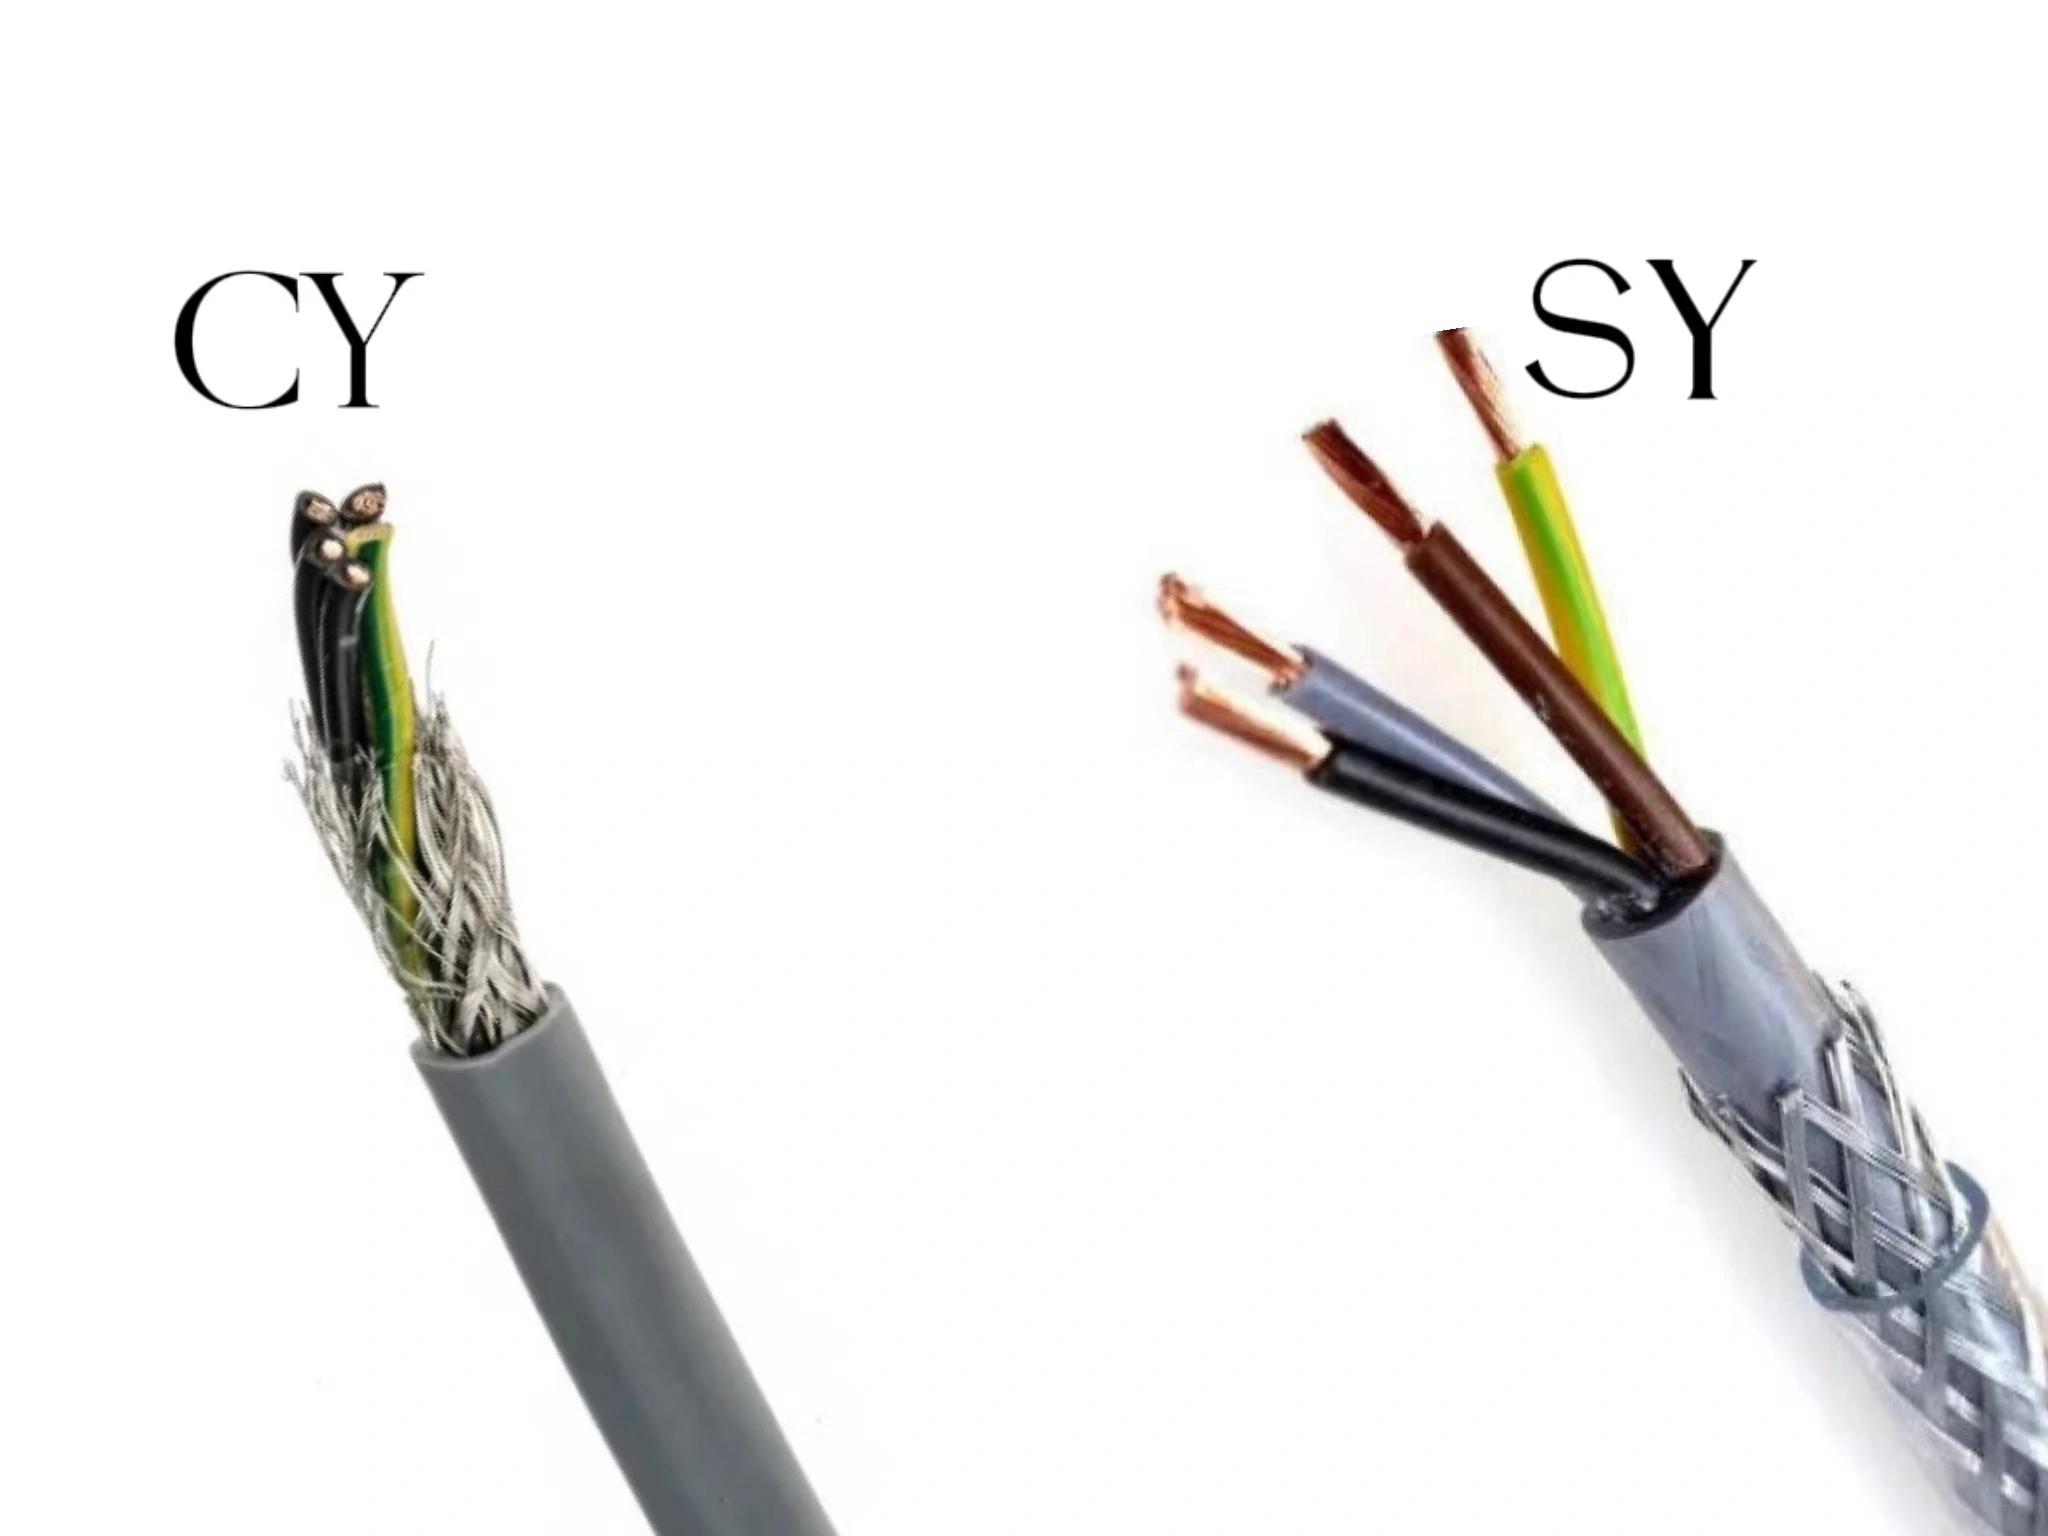 cy vs sy cable